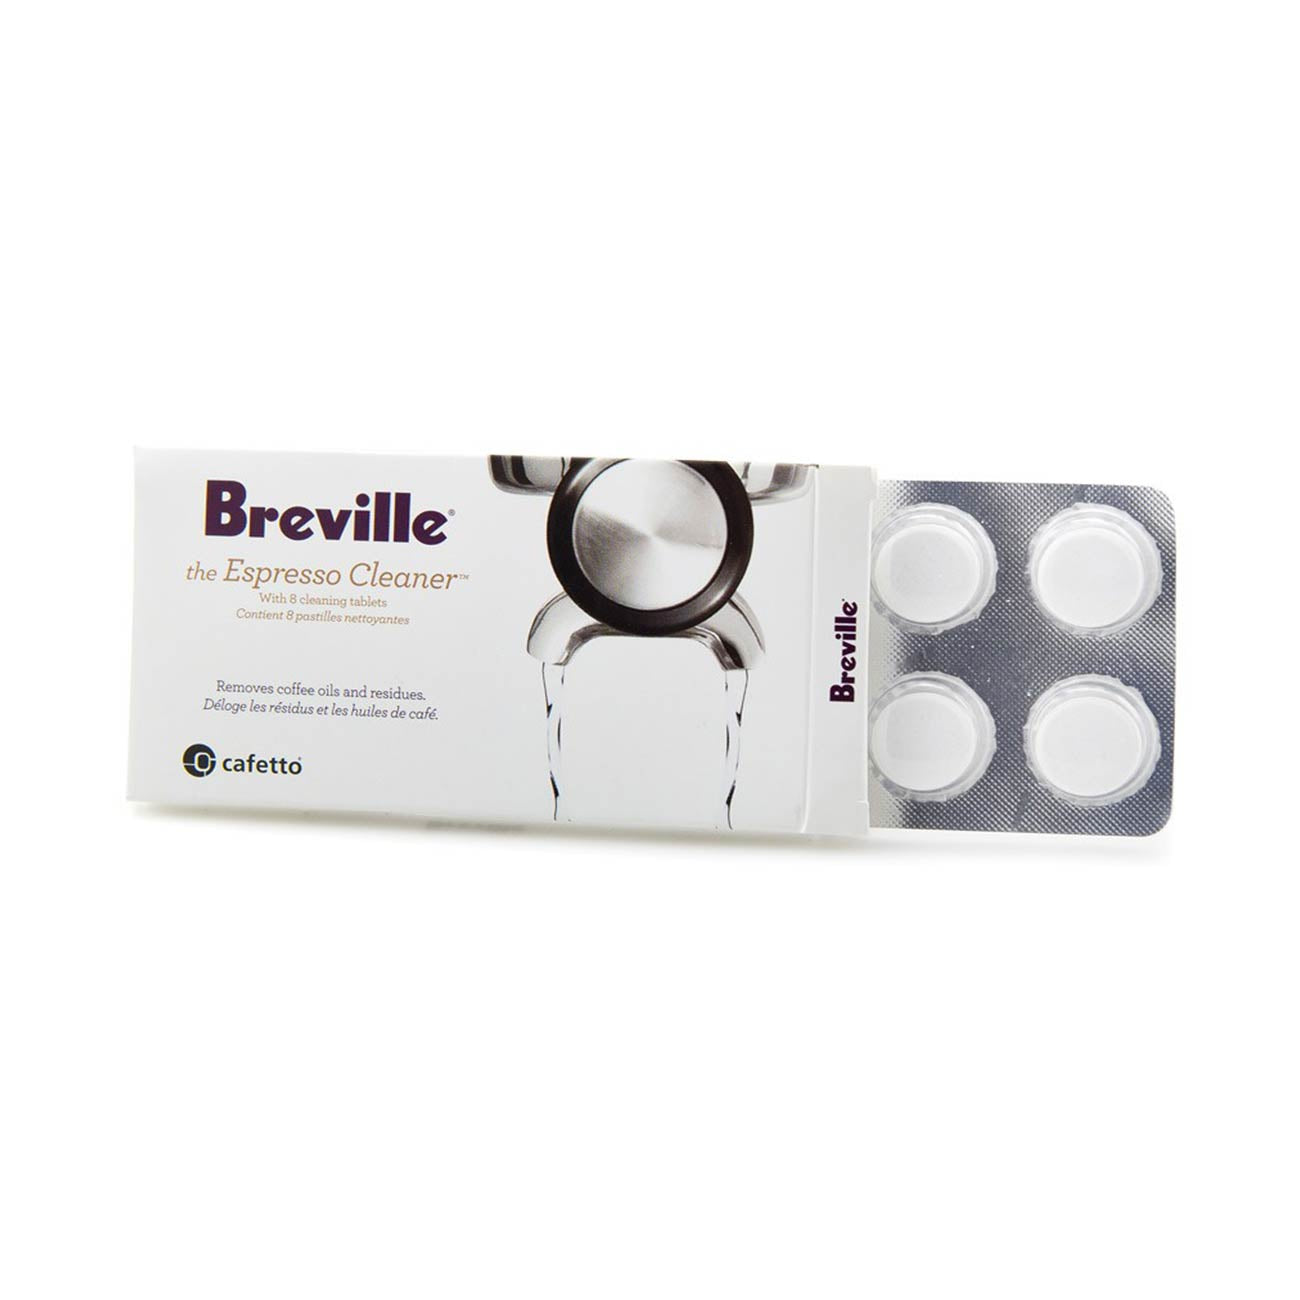 Breville - Espresso Cleaning Tablets